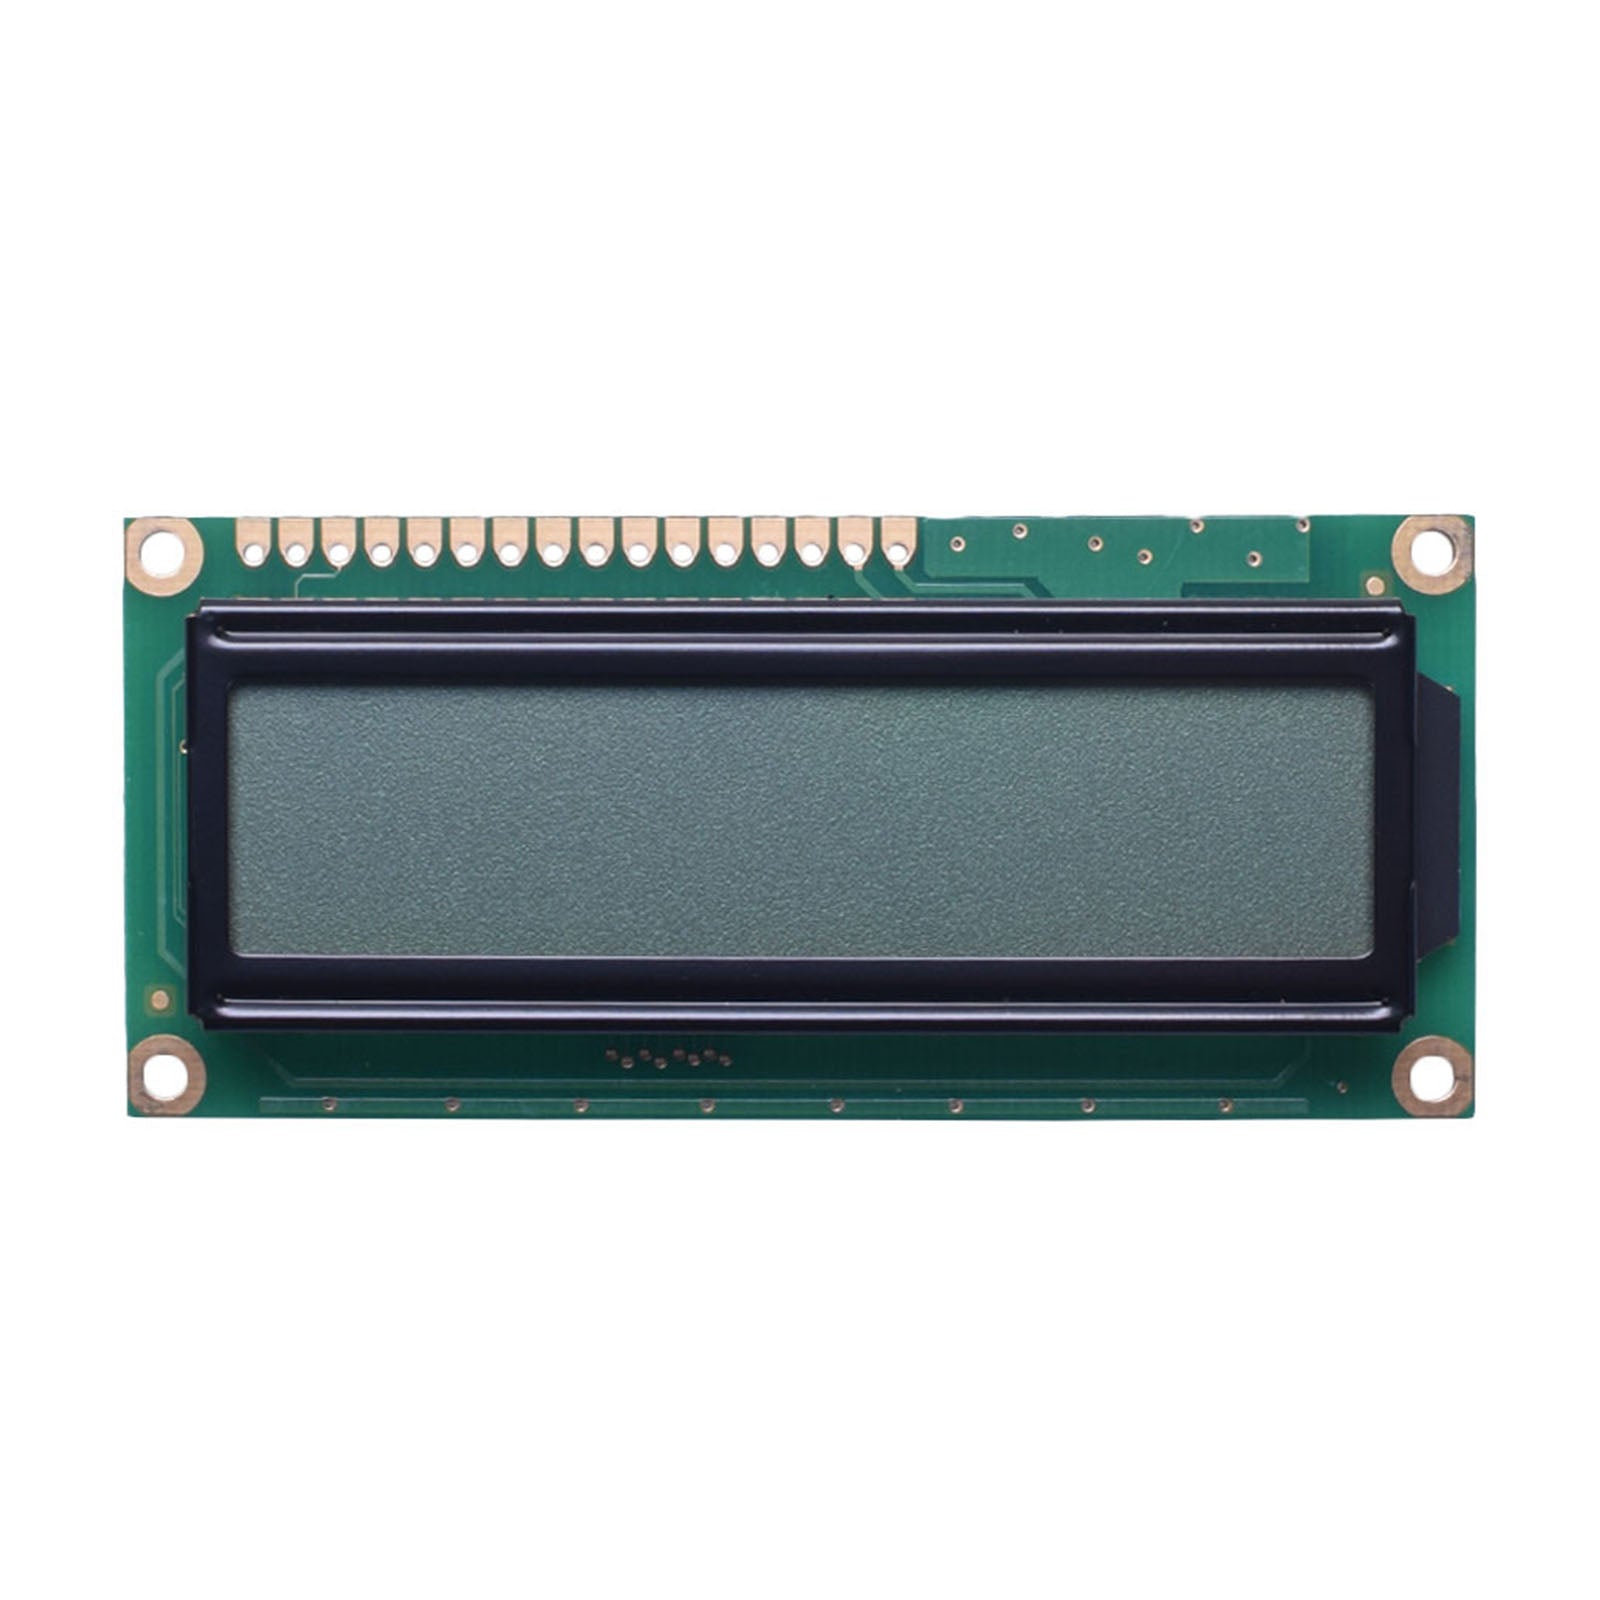 16 characters blue LCD module with FSTN transflective technology and MCU interface